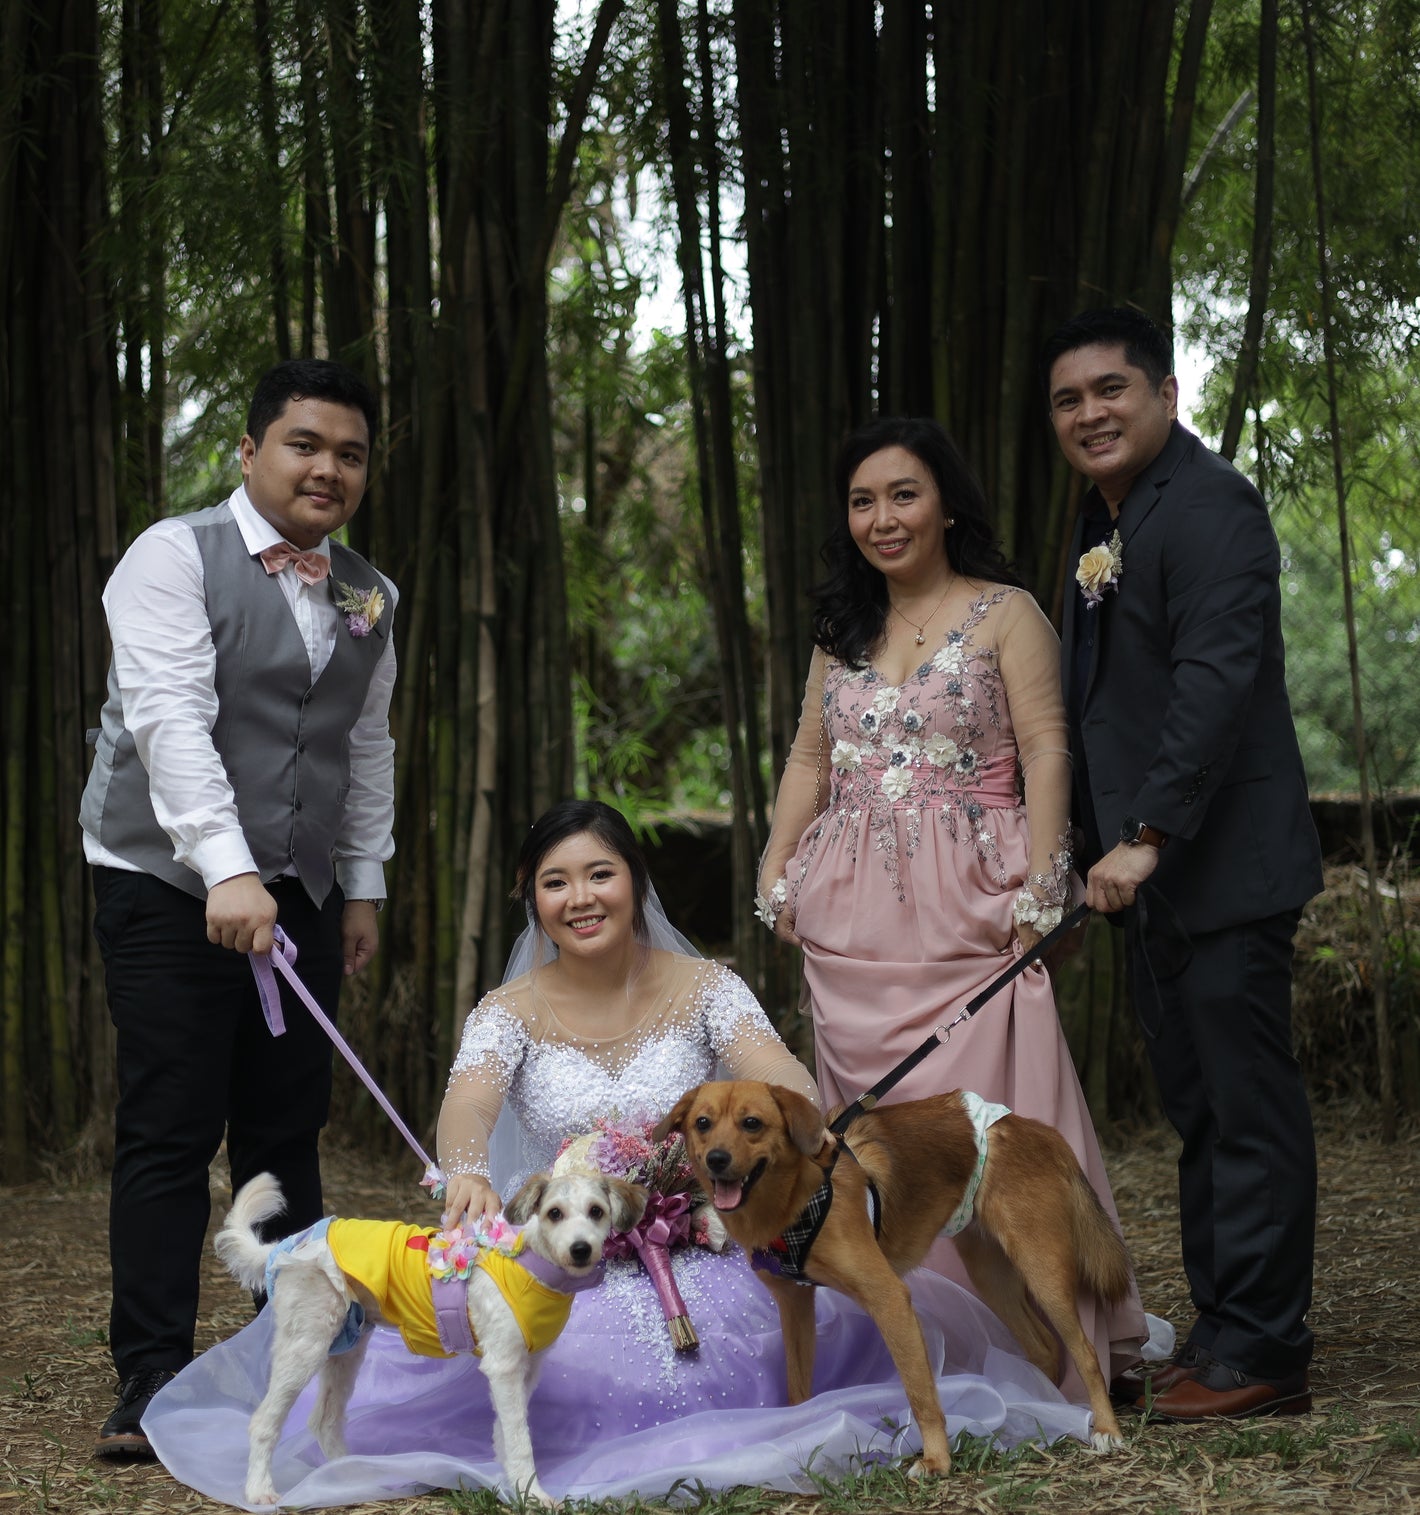 Wedding photo features the two family dogs along with the bridal party.